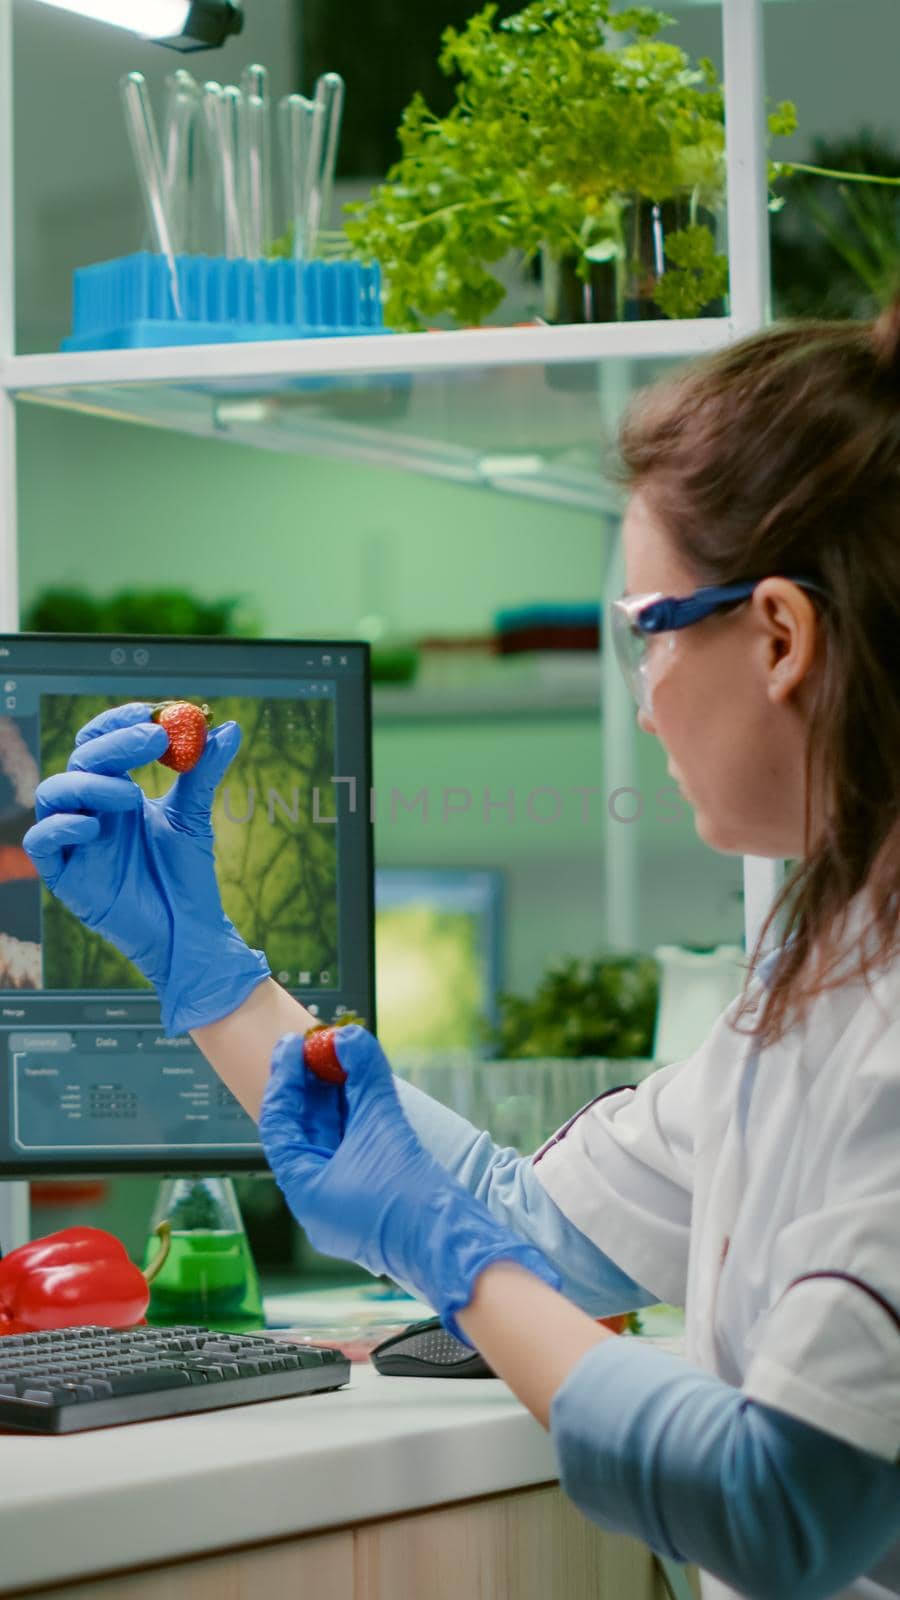 Scientist researcher injecting strawberry with pesticides while working in biological laboratory. Biochemist examining organic fruits typing medical expertise information on computer